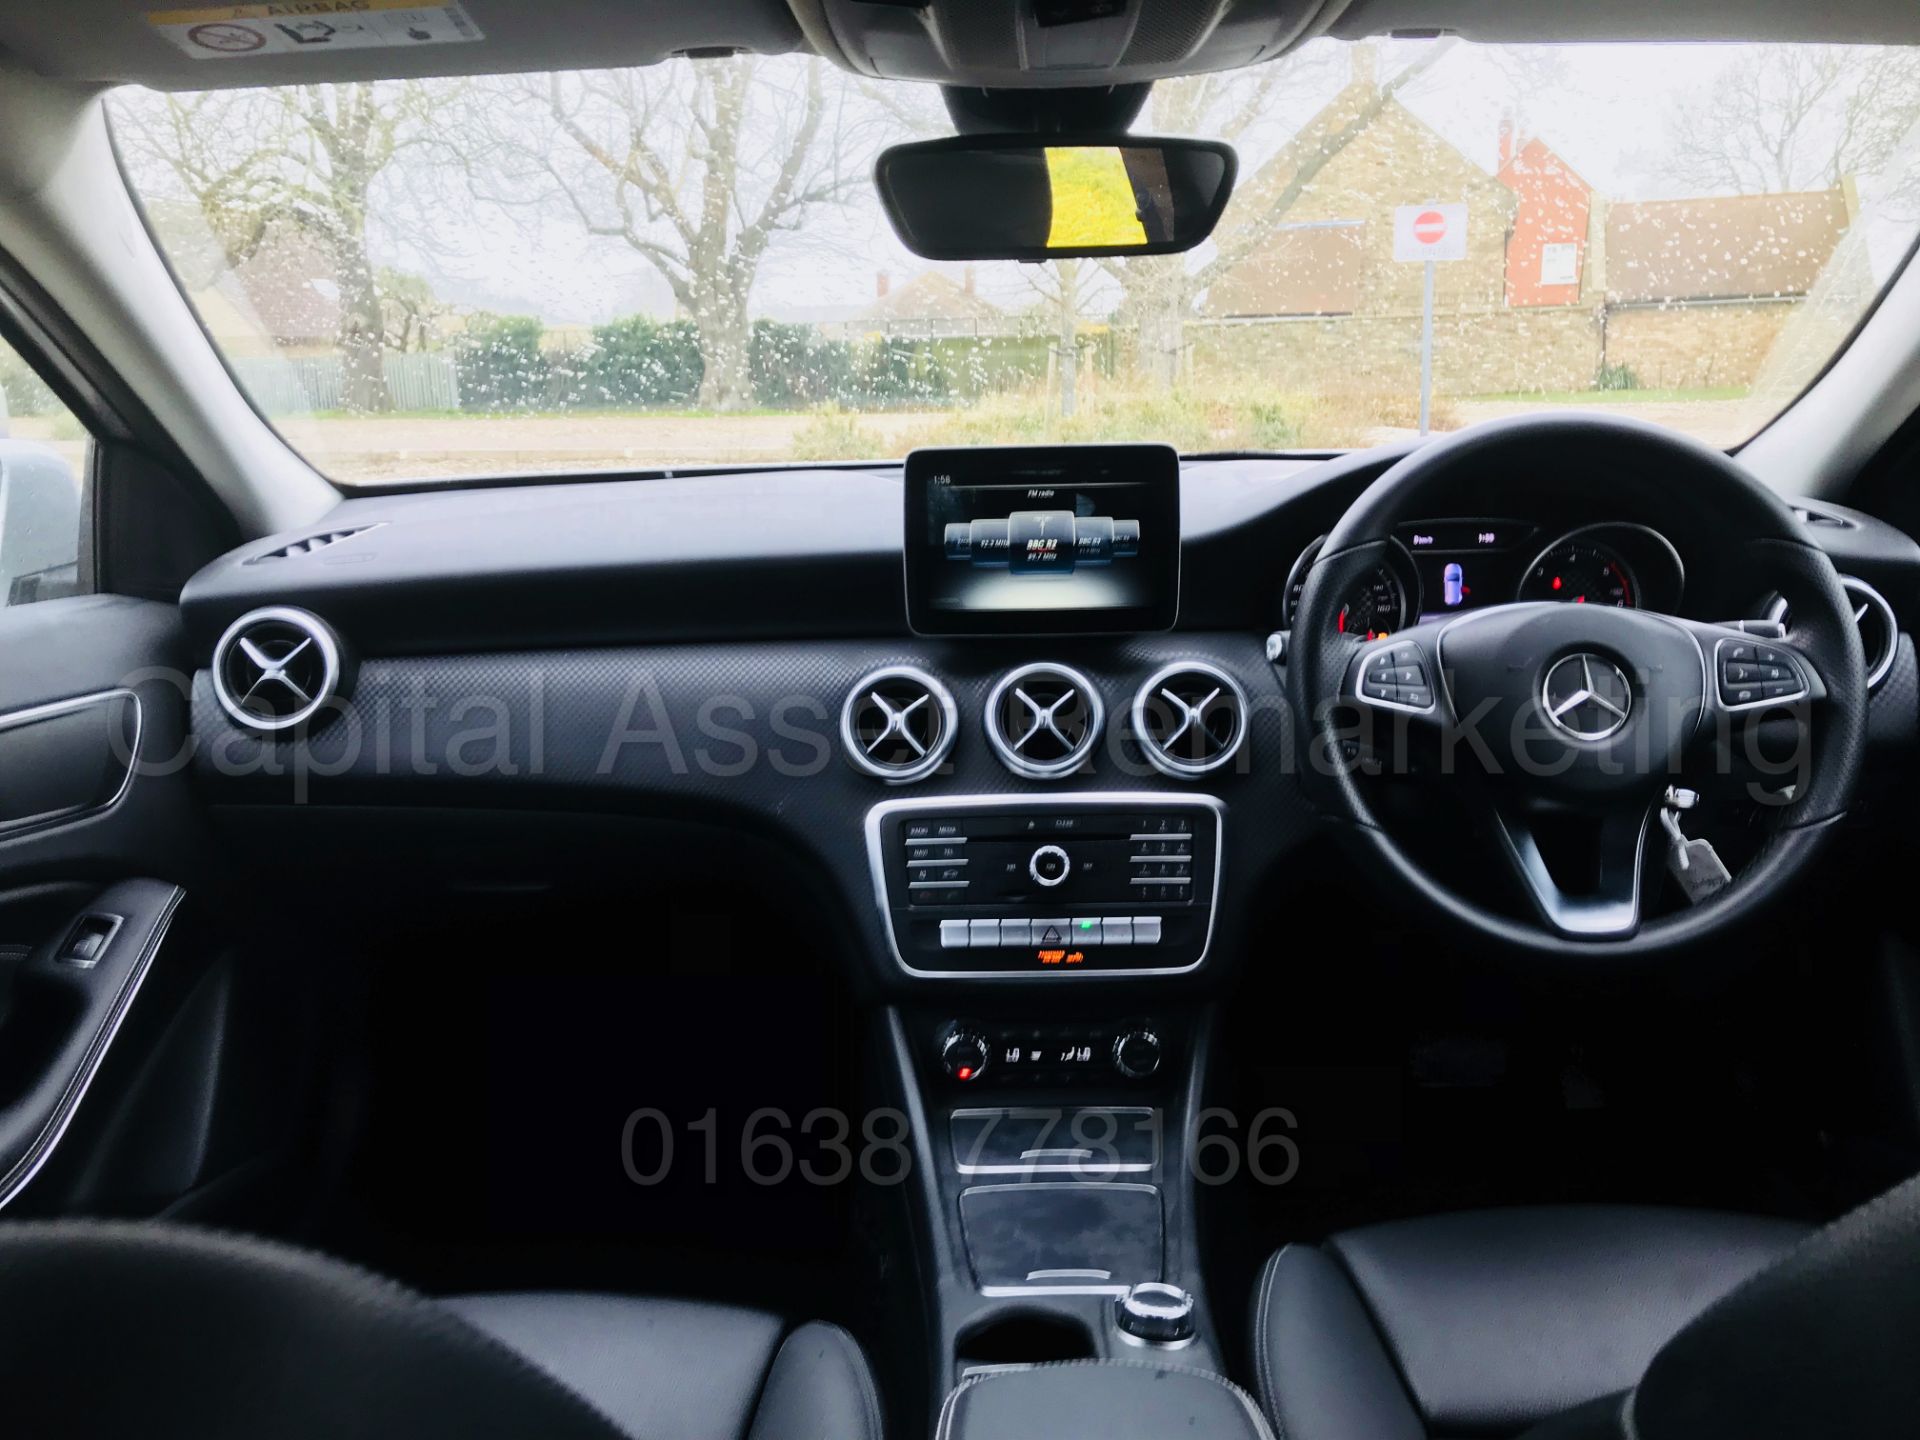 MERCEDES-BENZ A180D 'SPORT' (2017 MODEL) '7G TRONIC AUTO - LEATHER - SAT NAV' (1 OWNER FROM NEW) - Image 29 of 41